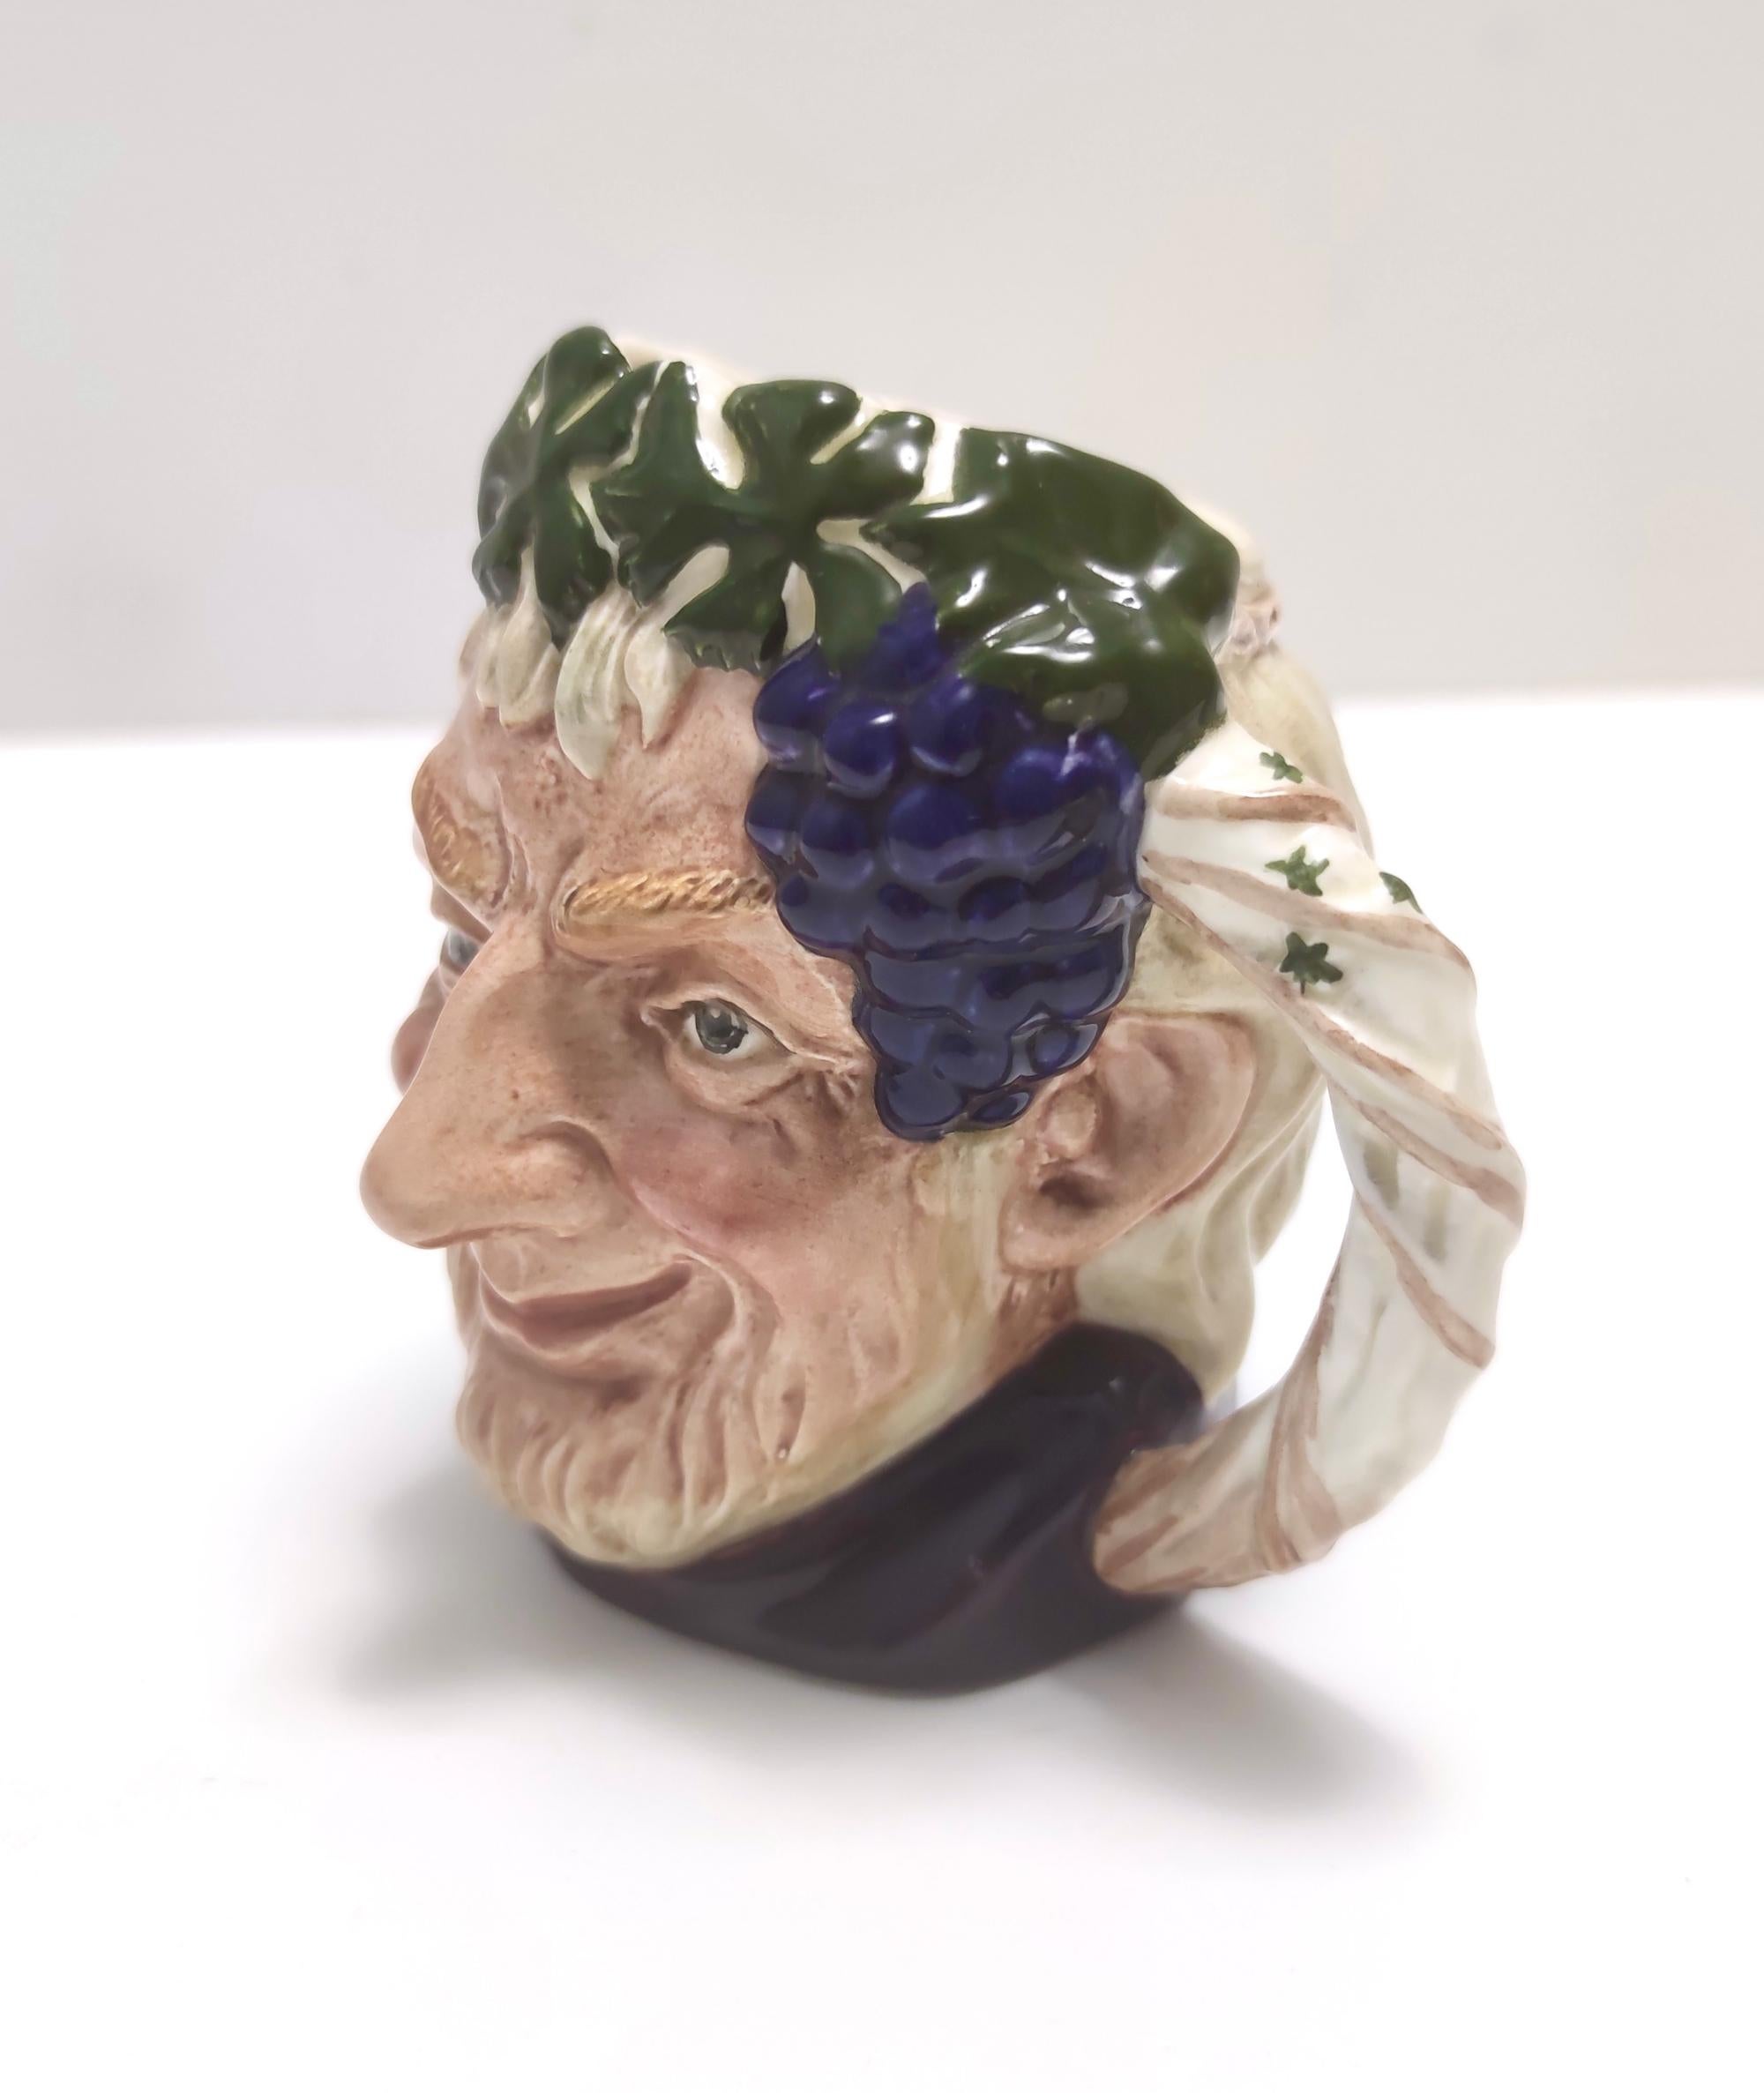 Vintage Grotesque Bacchus Ceramic Tankard by Royal Doulton, United Kingdom 1958 In Excellent Condition For Sale In Bresso, Lombardy